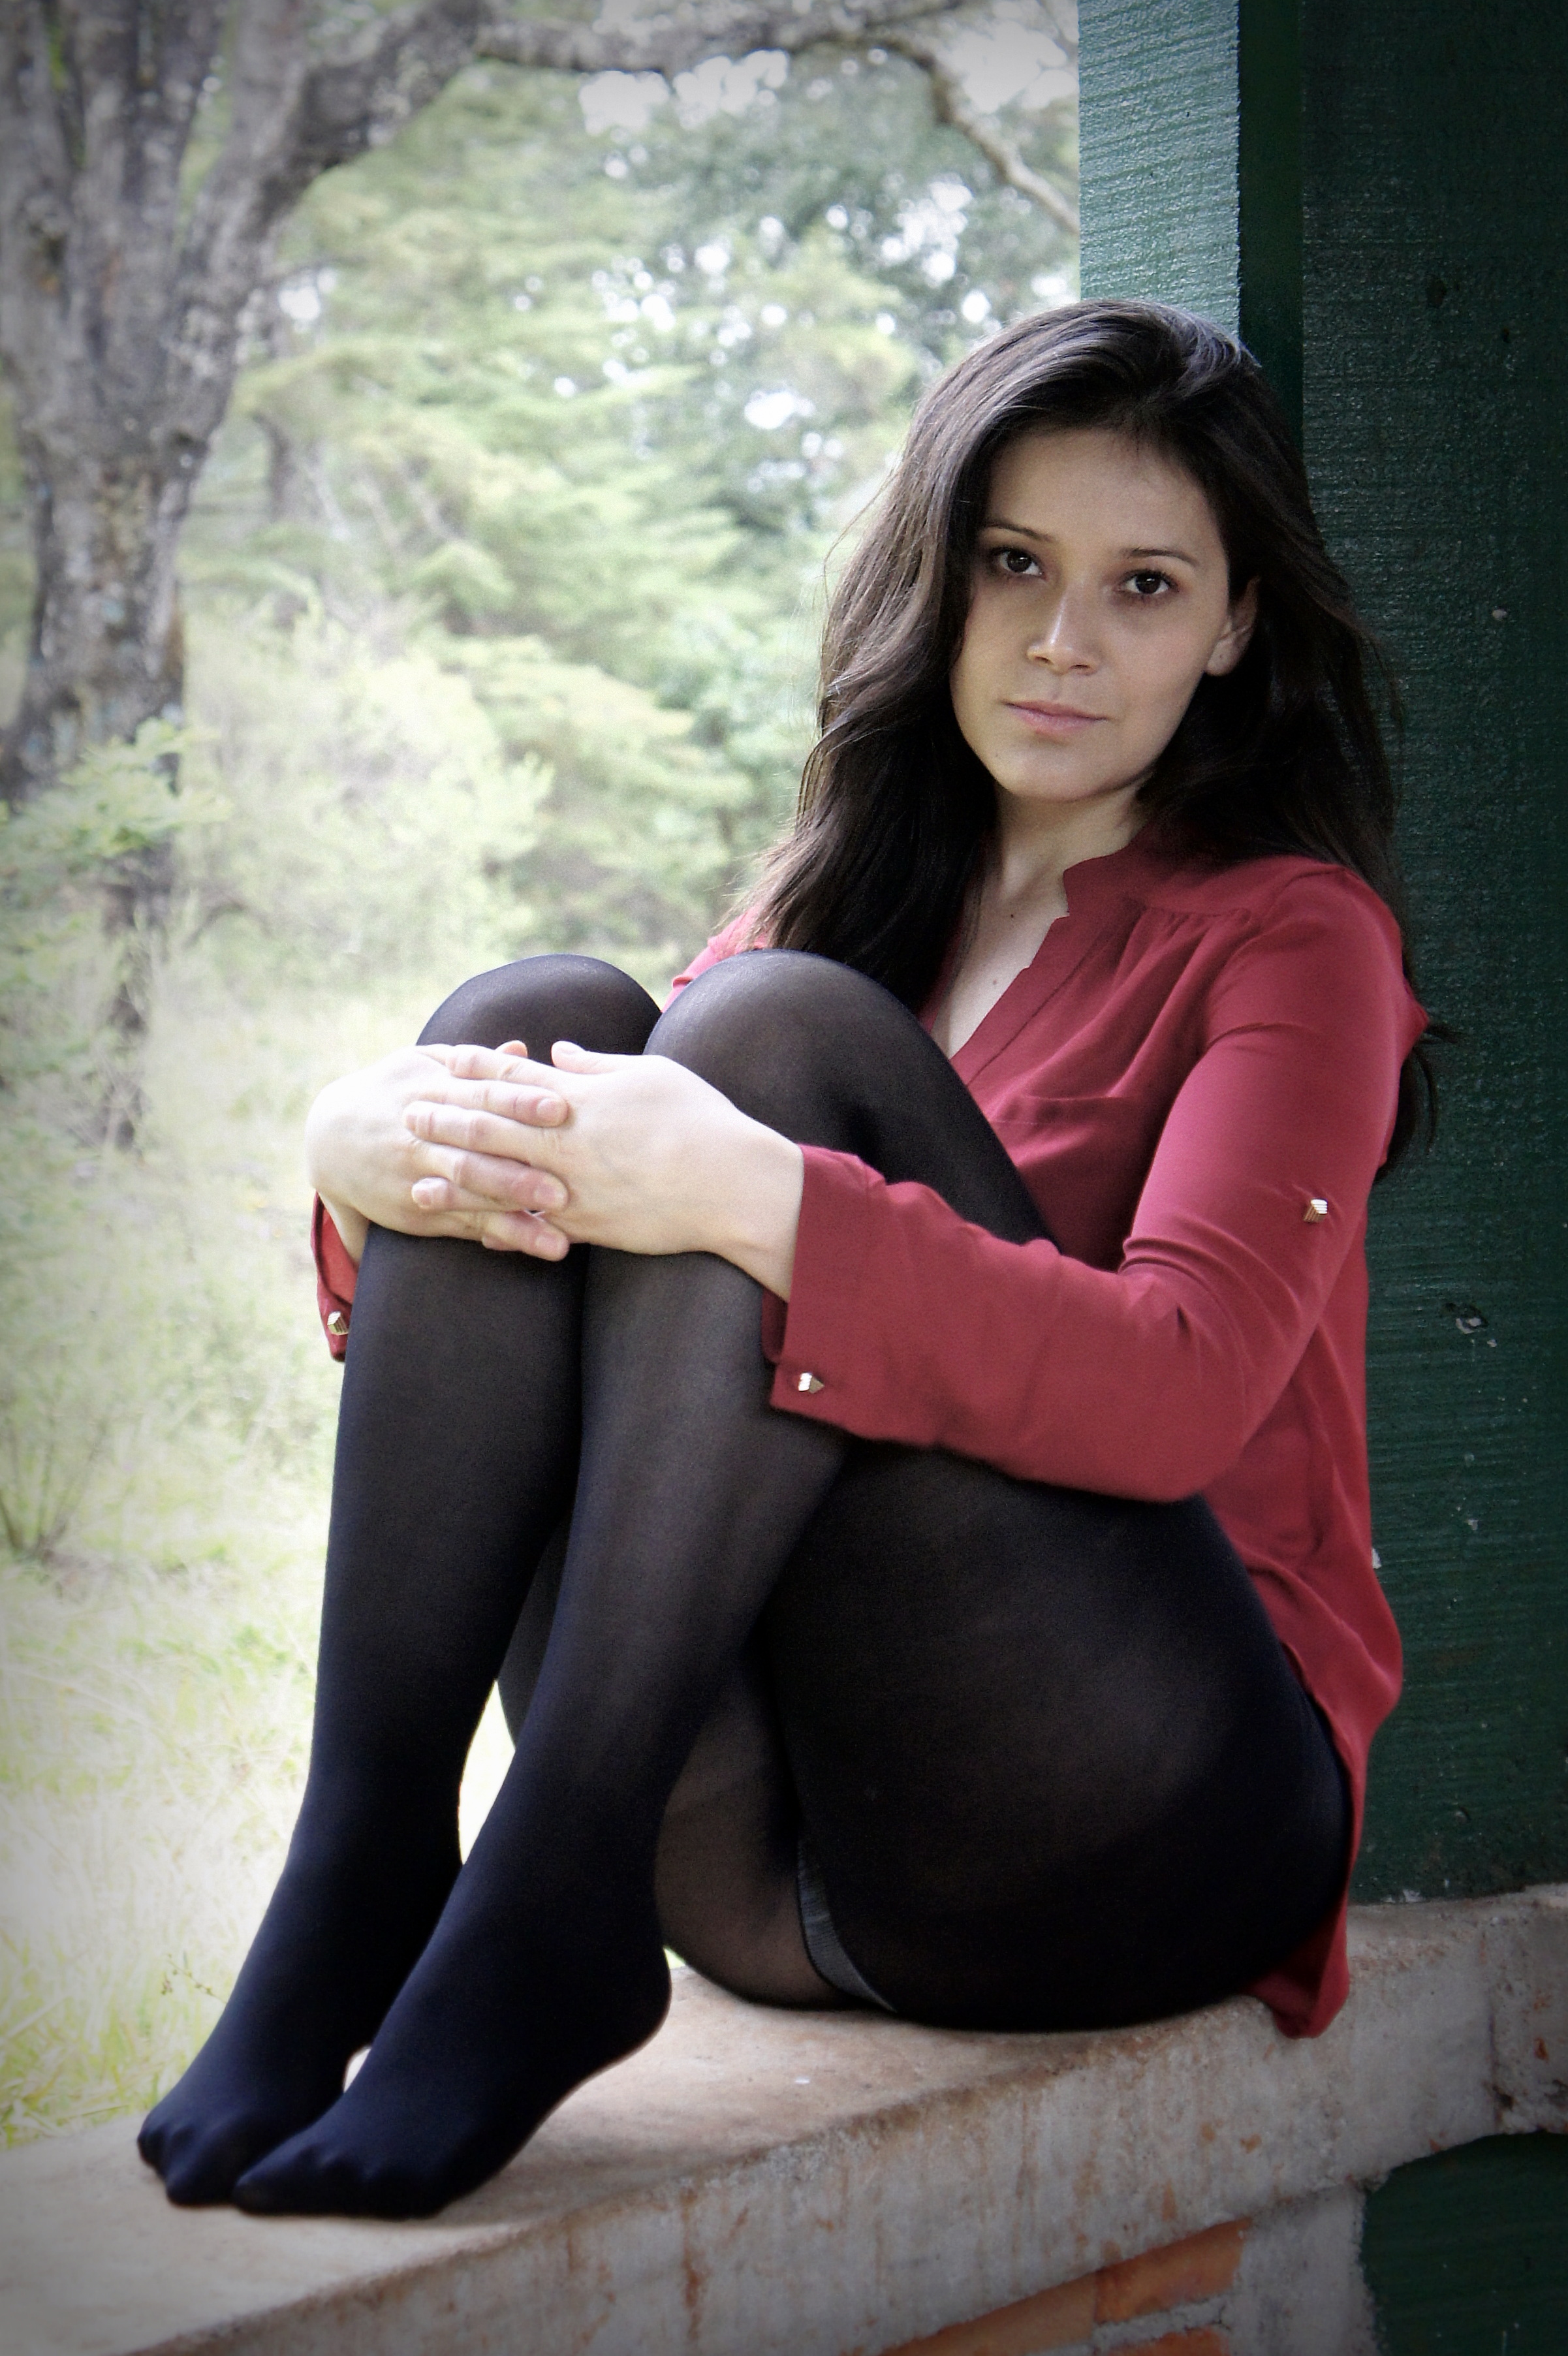 File:Girl in red shirt and black tights.jpg - Wikimedia Commons